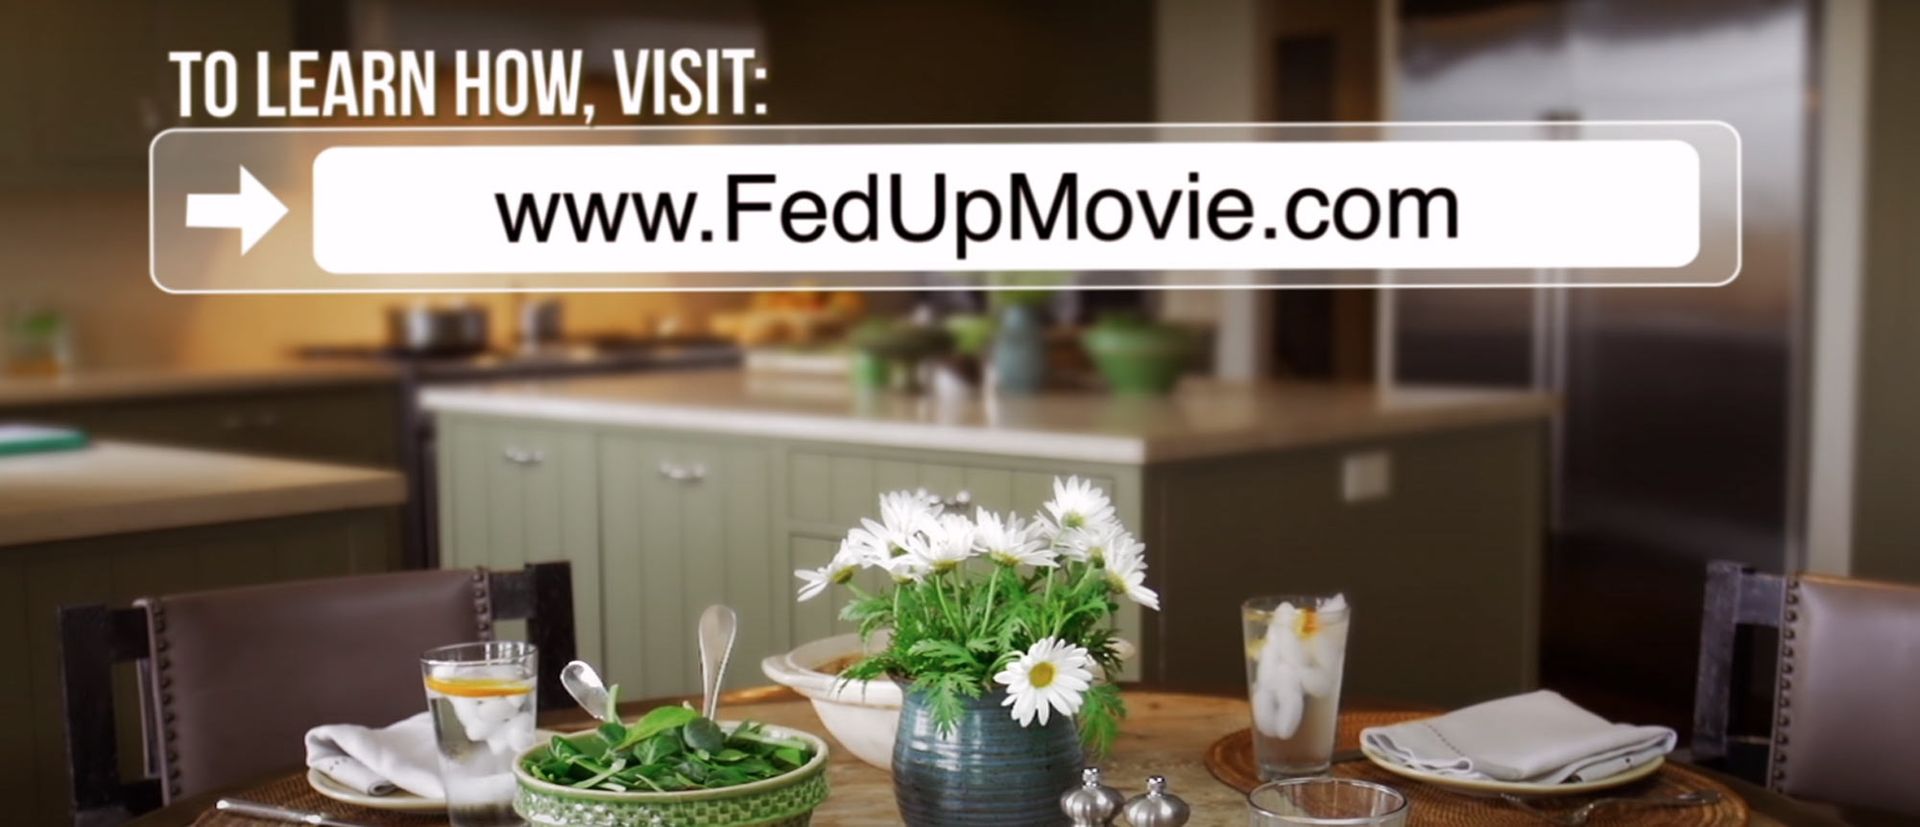 Watch The Fed Up Documentary by Katie Couric. 